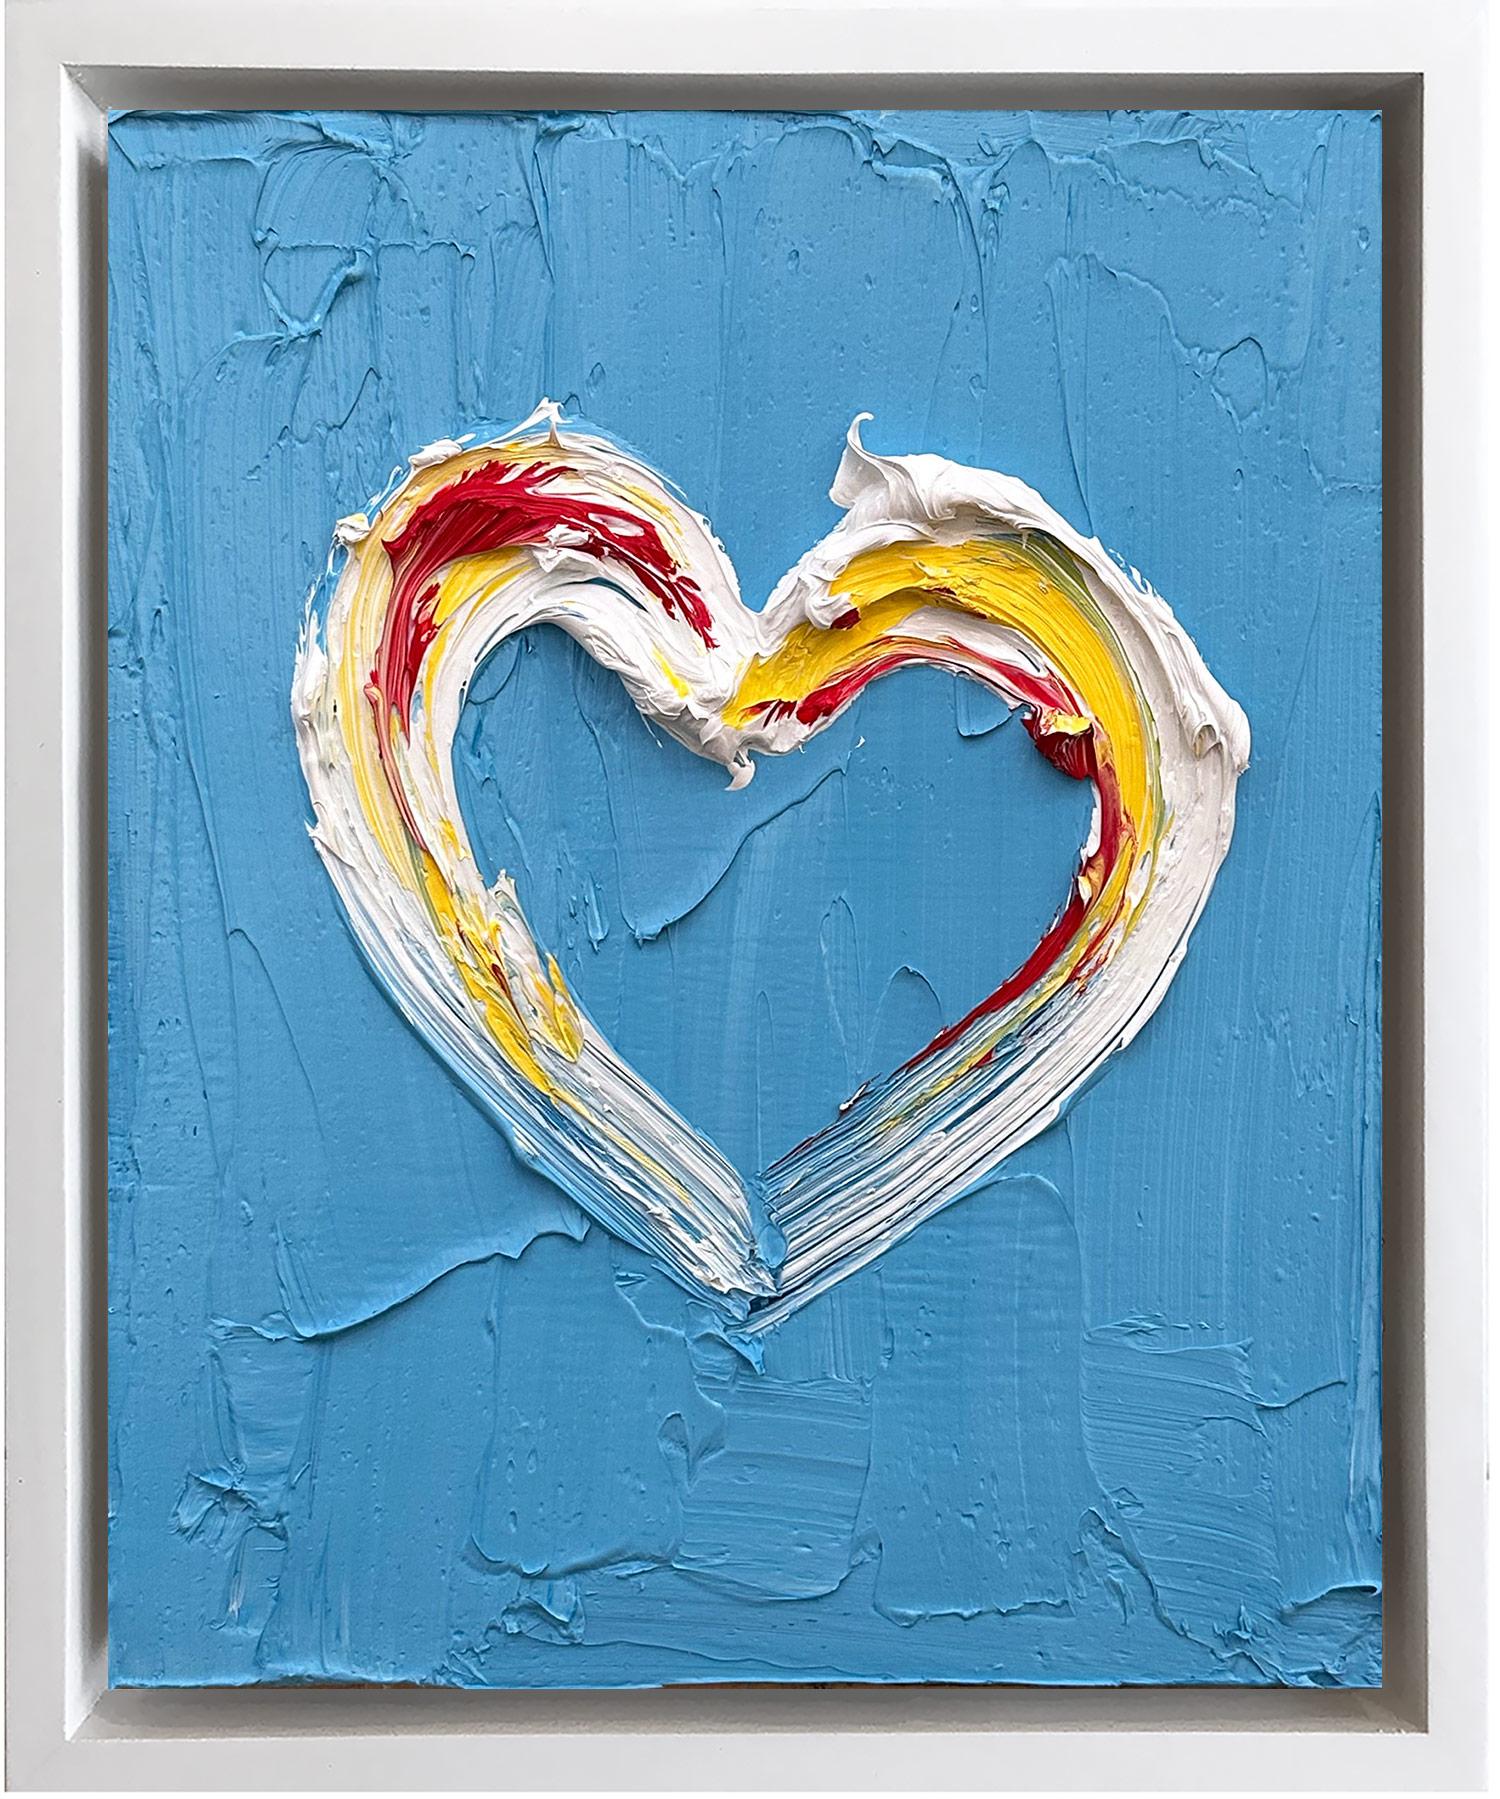 Cindy Shaoul Abstract Painting - "My Prada Heart" Contemporary Oil Painting on Wood with White Floater Frame